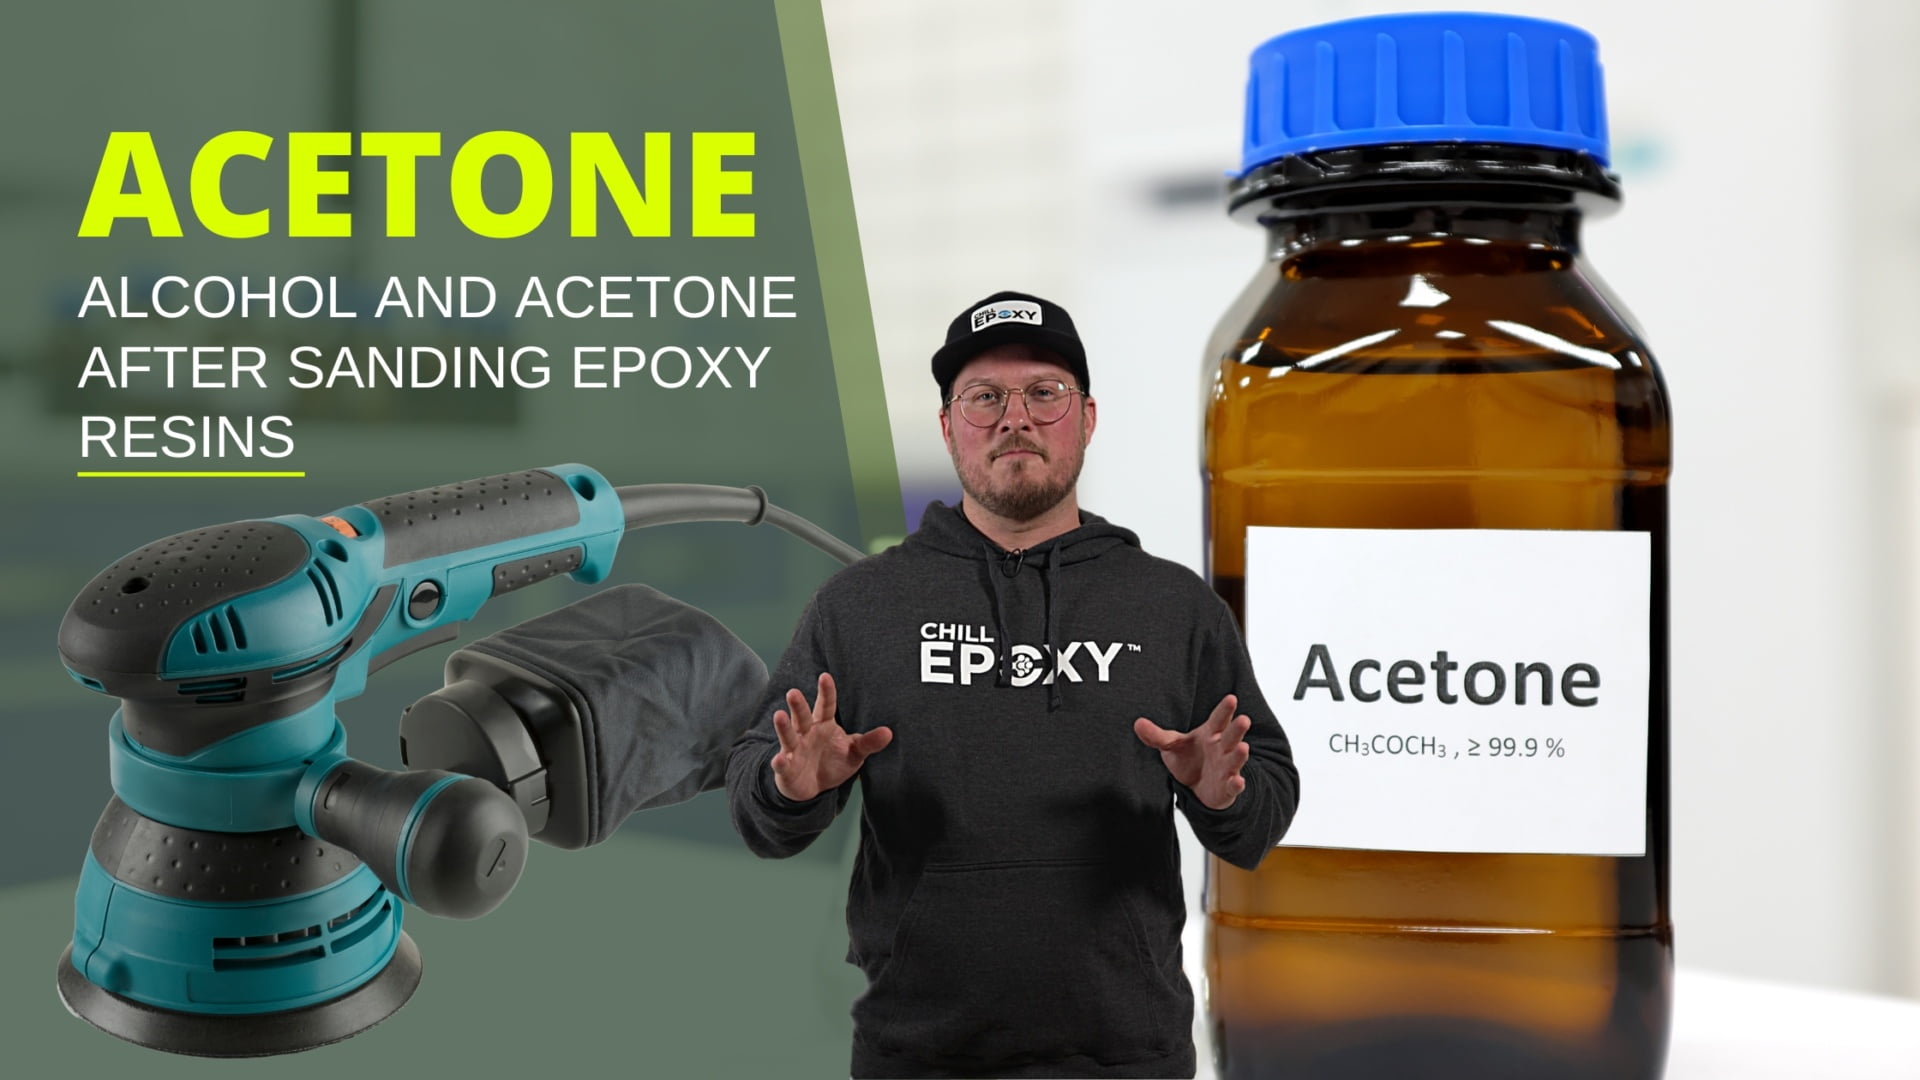 Alcohol and Acetone After Sanding Epoxy Resins